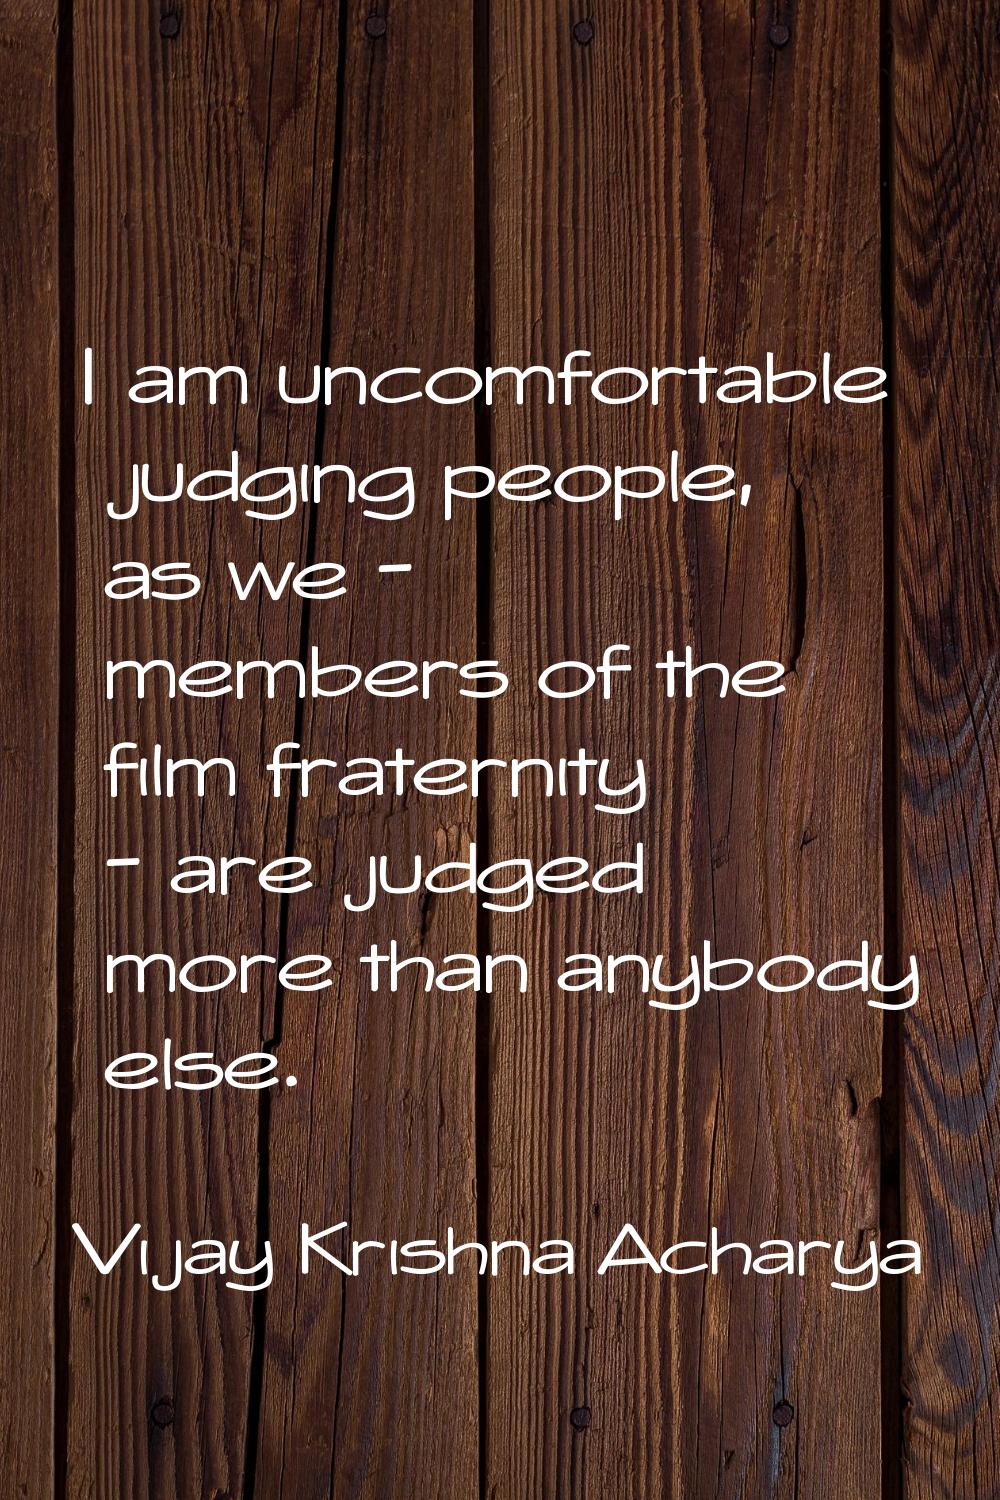 I am uncomfortable judging people, as we - members of the film fraternity - are judged more than an